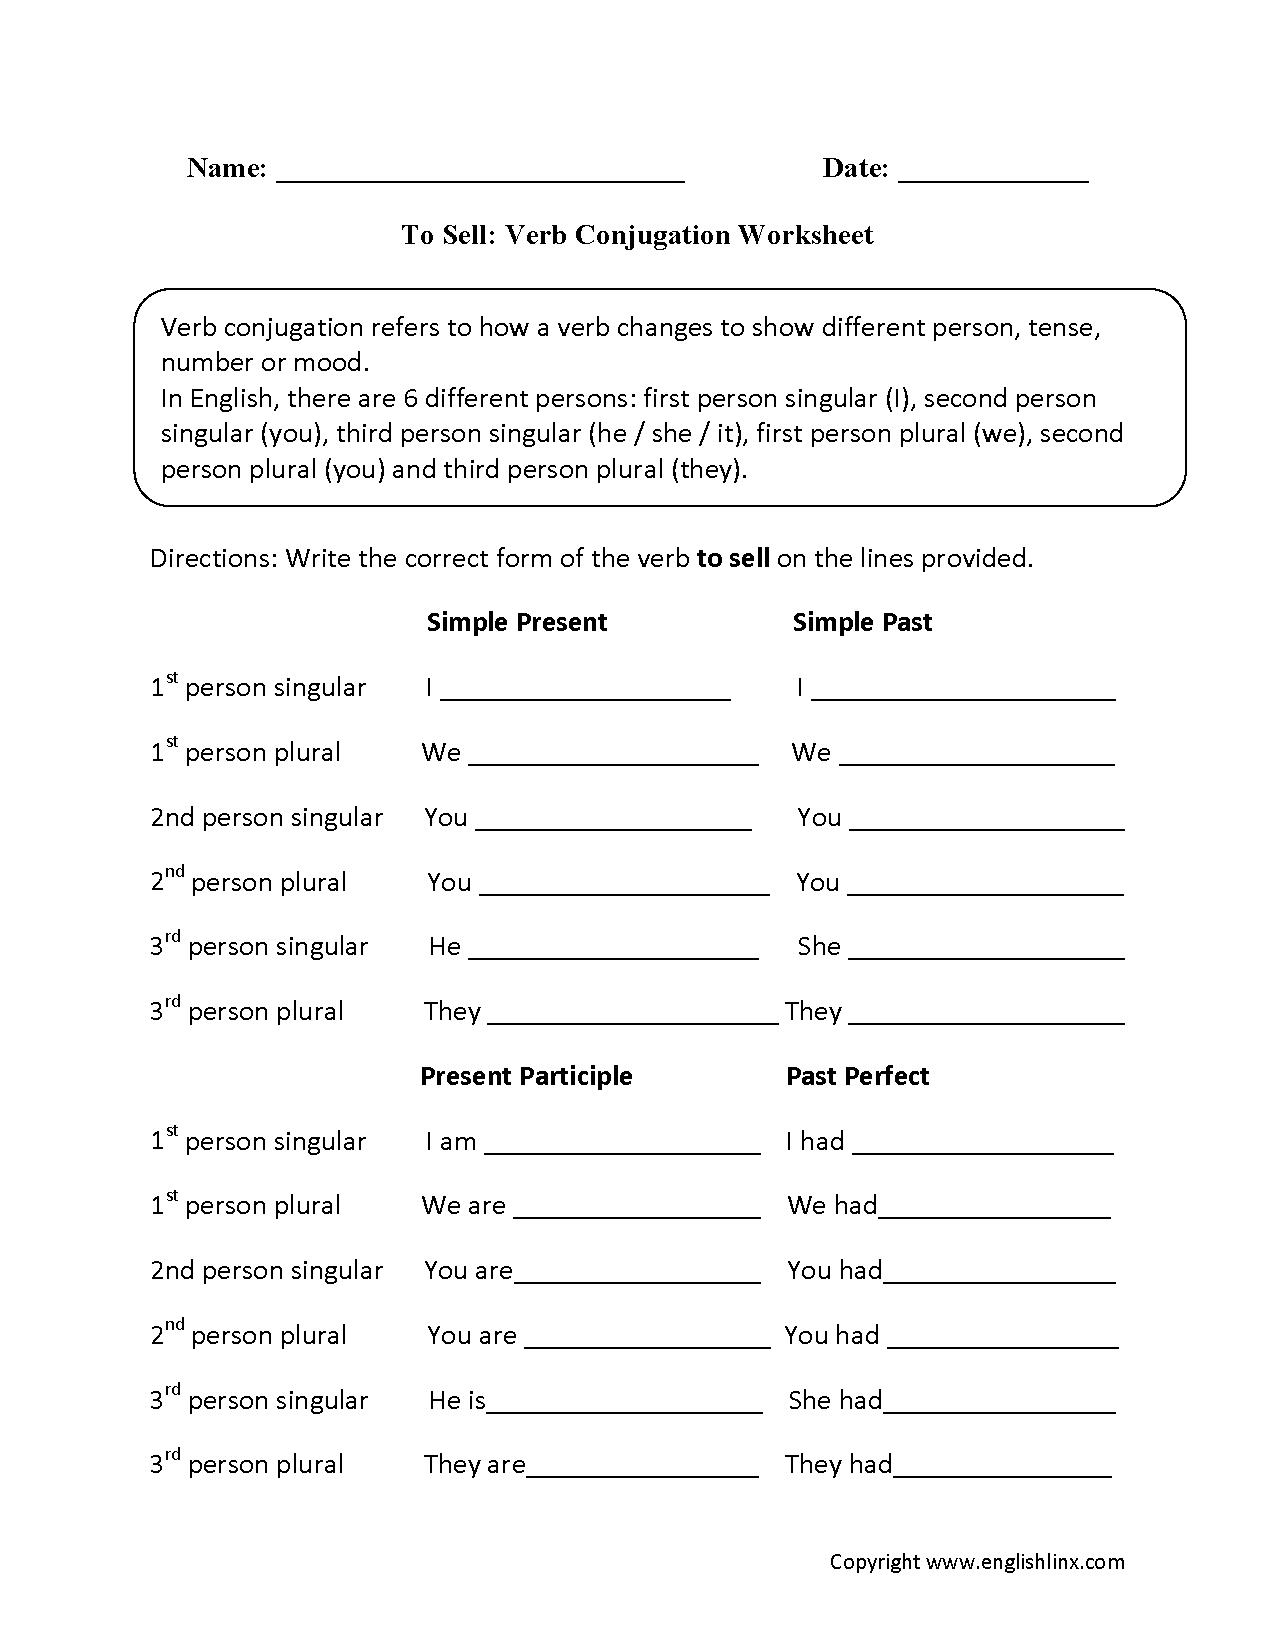 To Sell Verb Conjugation Worksheets